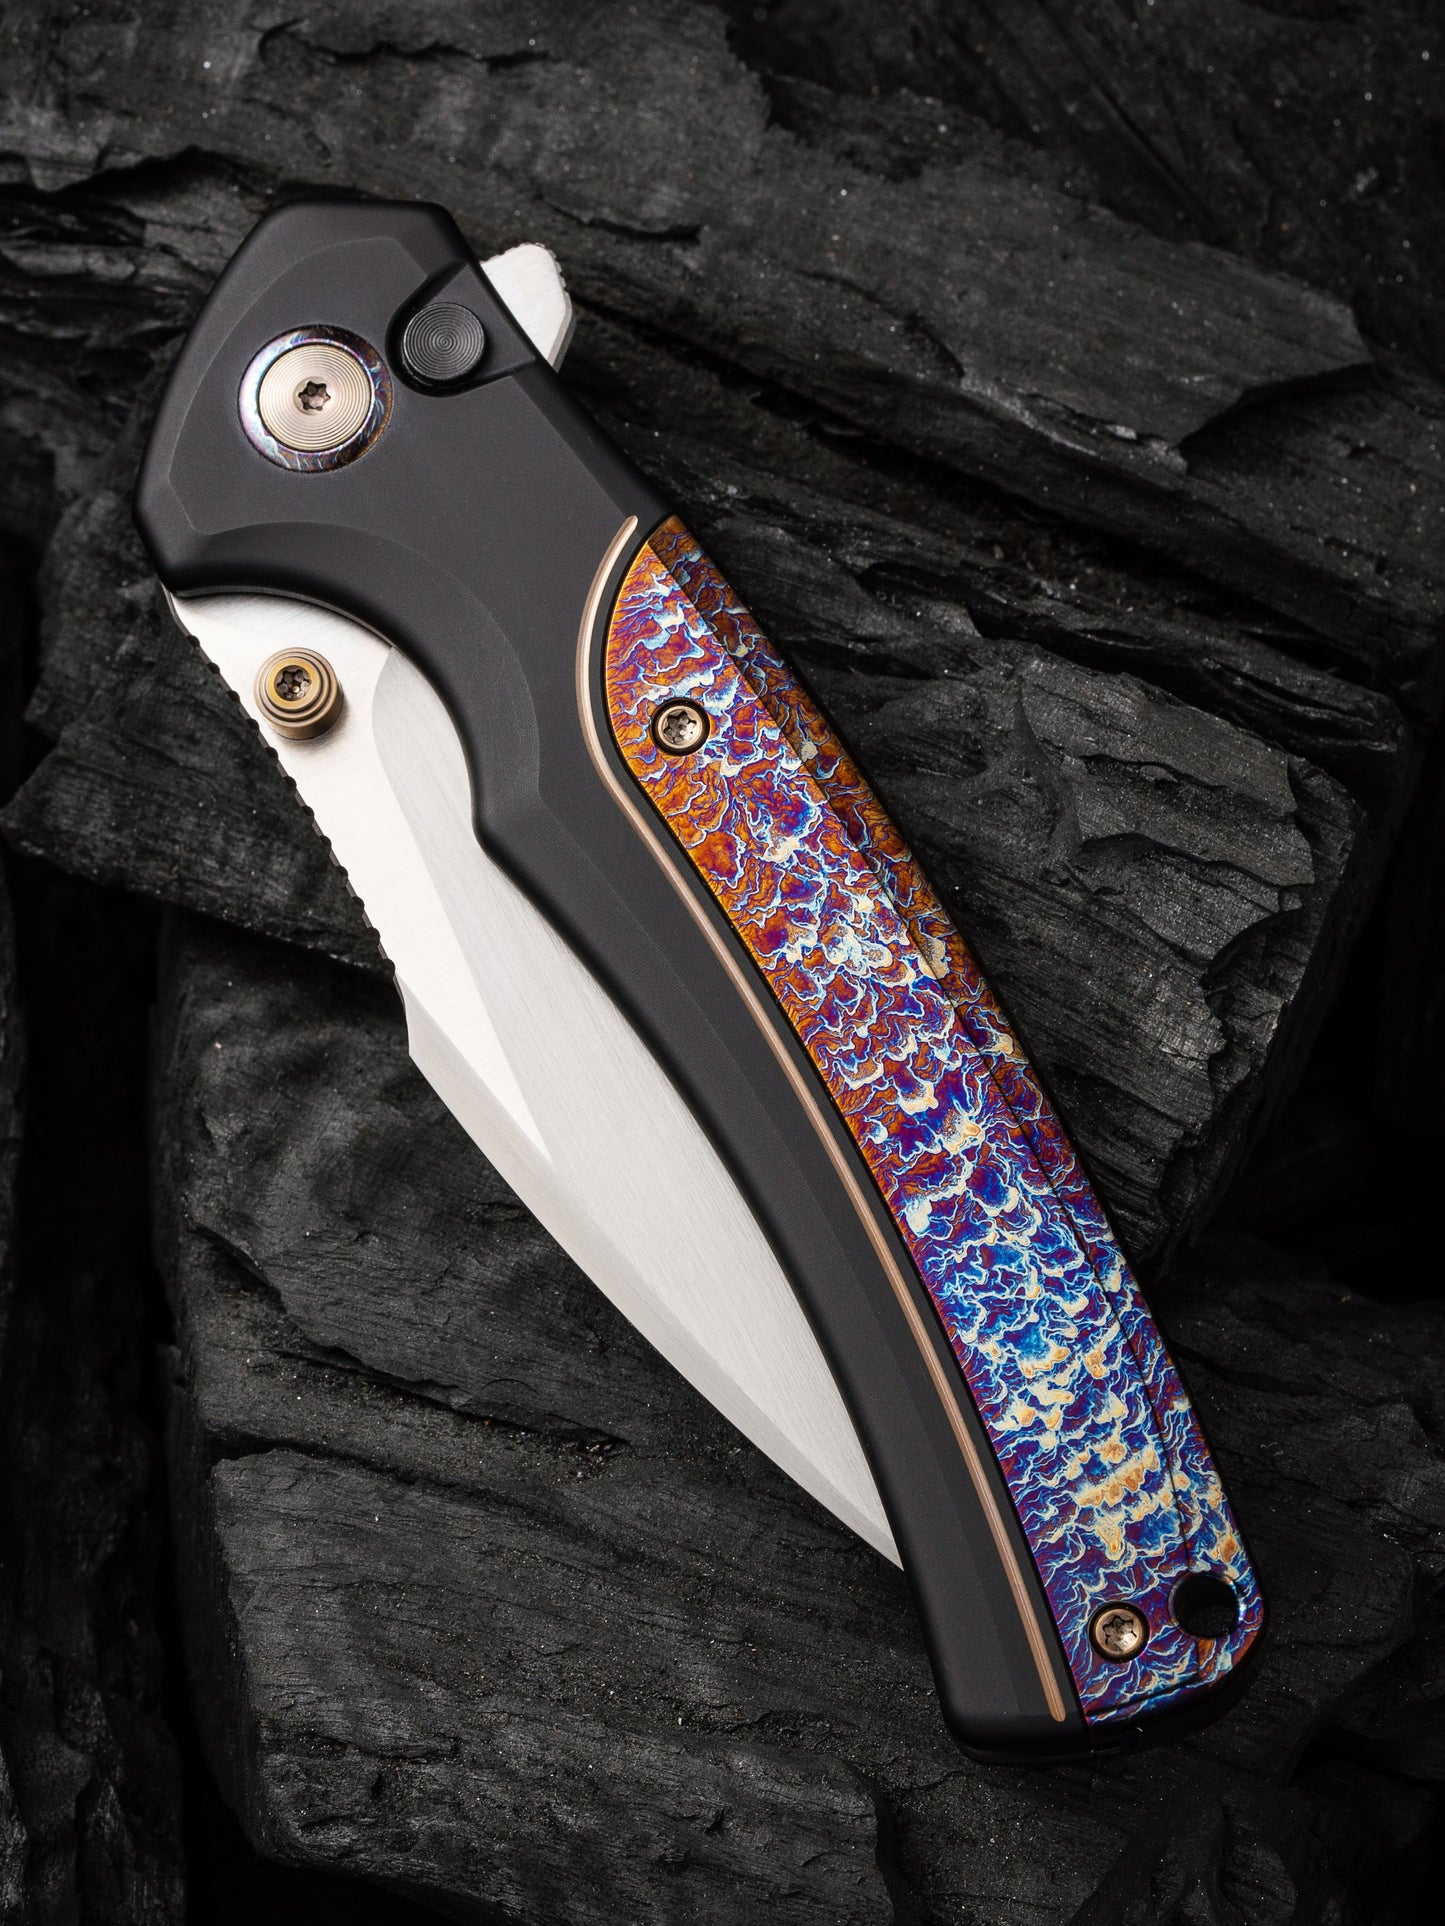 WE Ziffius Limited Edition 3.7" CPM 20CV Flamed Titanium Integral Spacer Folding Knife WE22024D-2